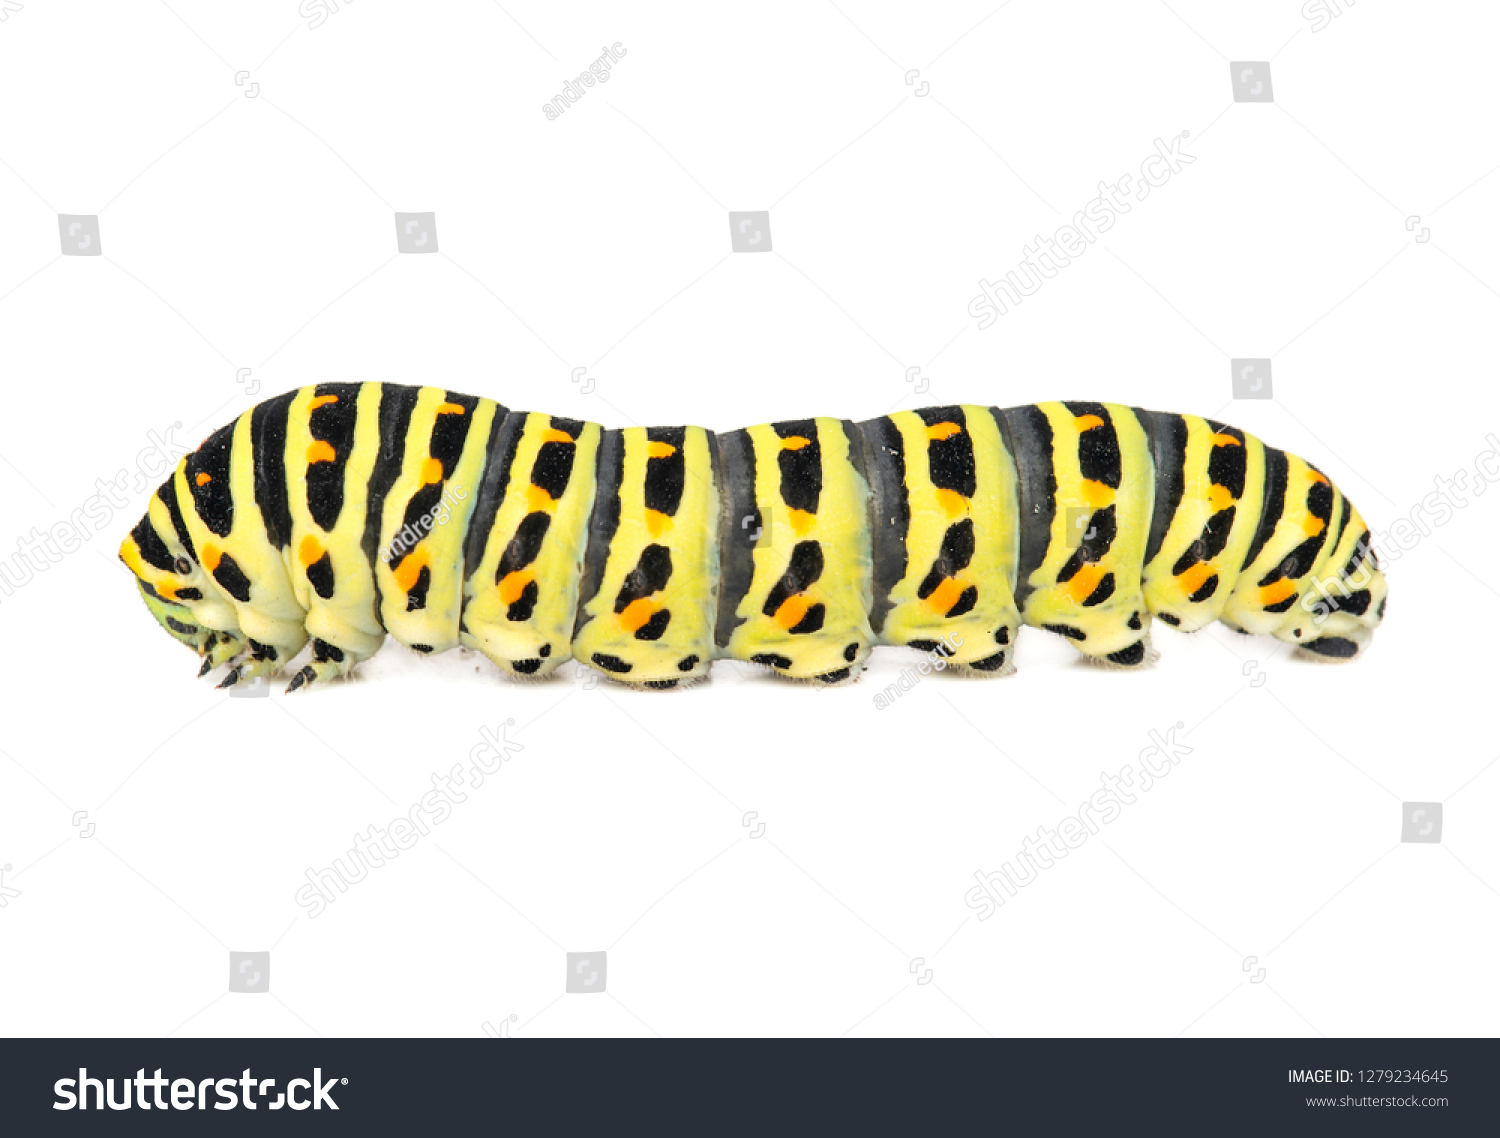 Yellow black swallowtail caterpillar isolated on white background #1279234645